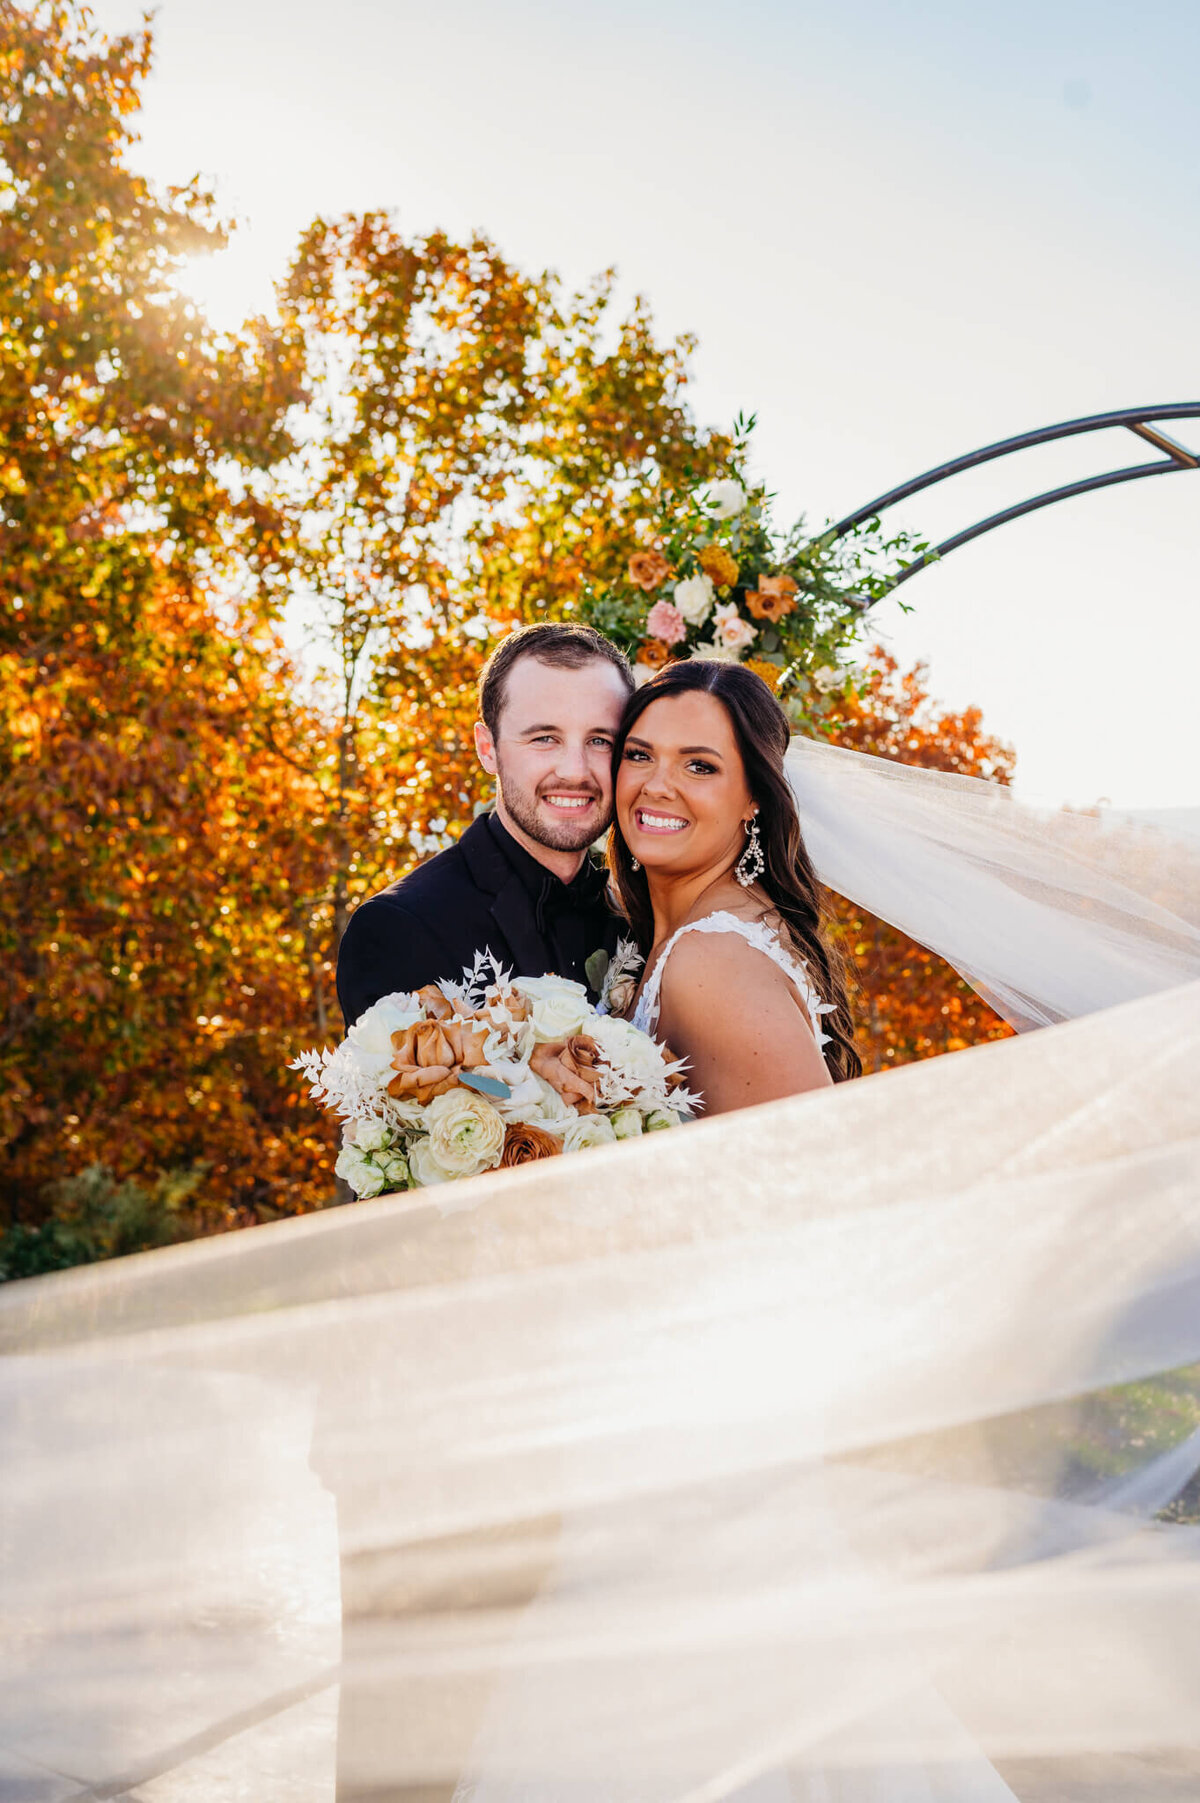 Photo of a bride and groom hugging and smiling while the brides veil flows in the wind